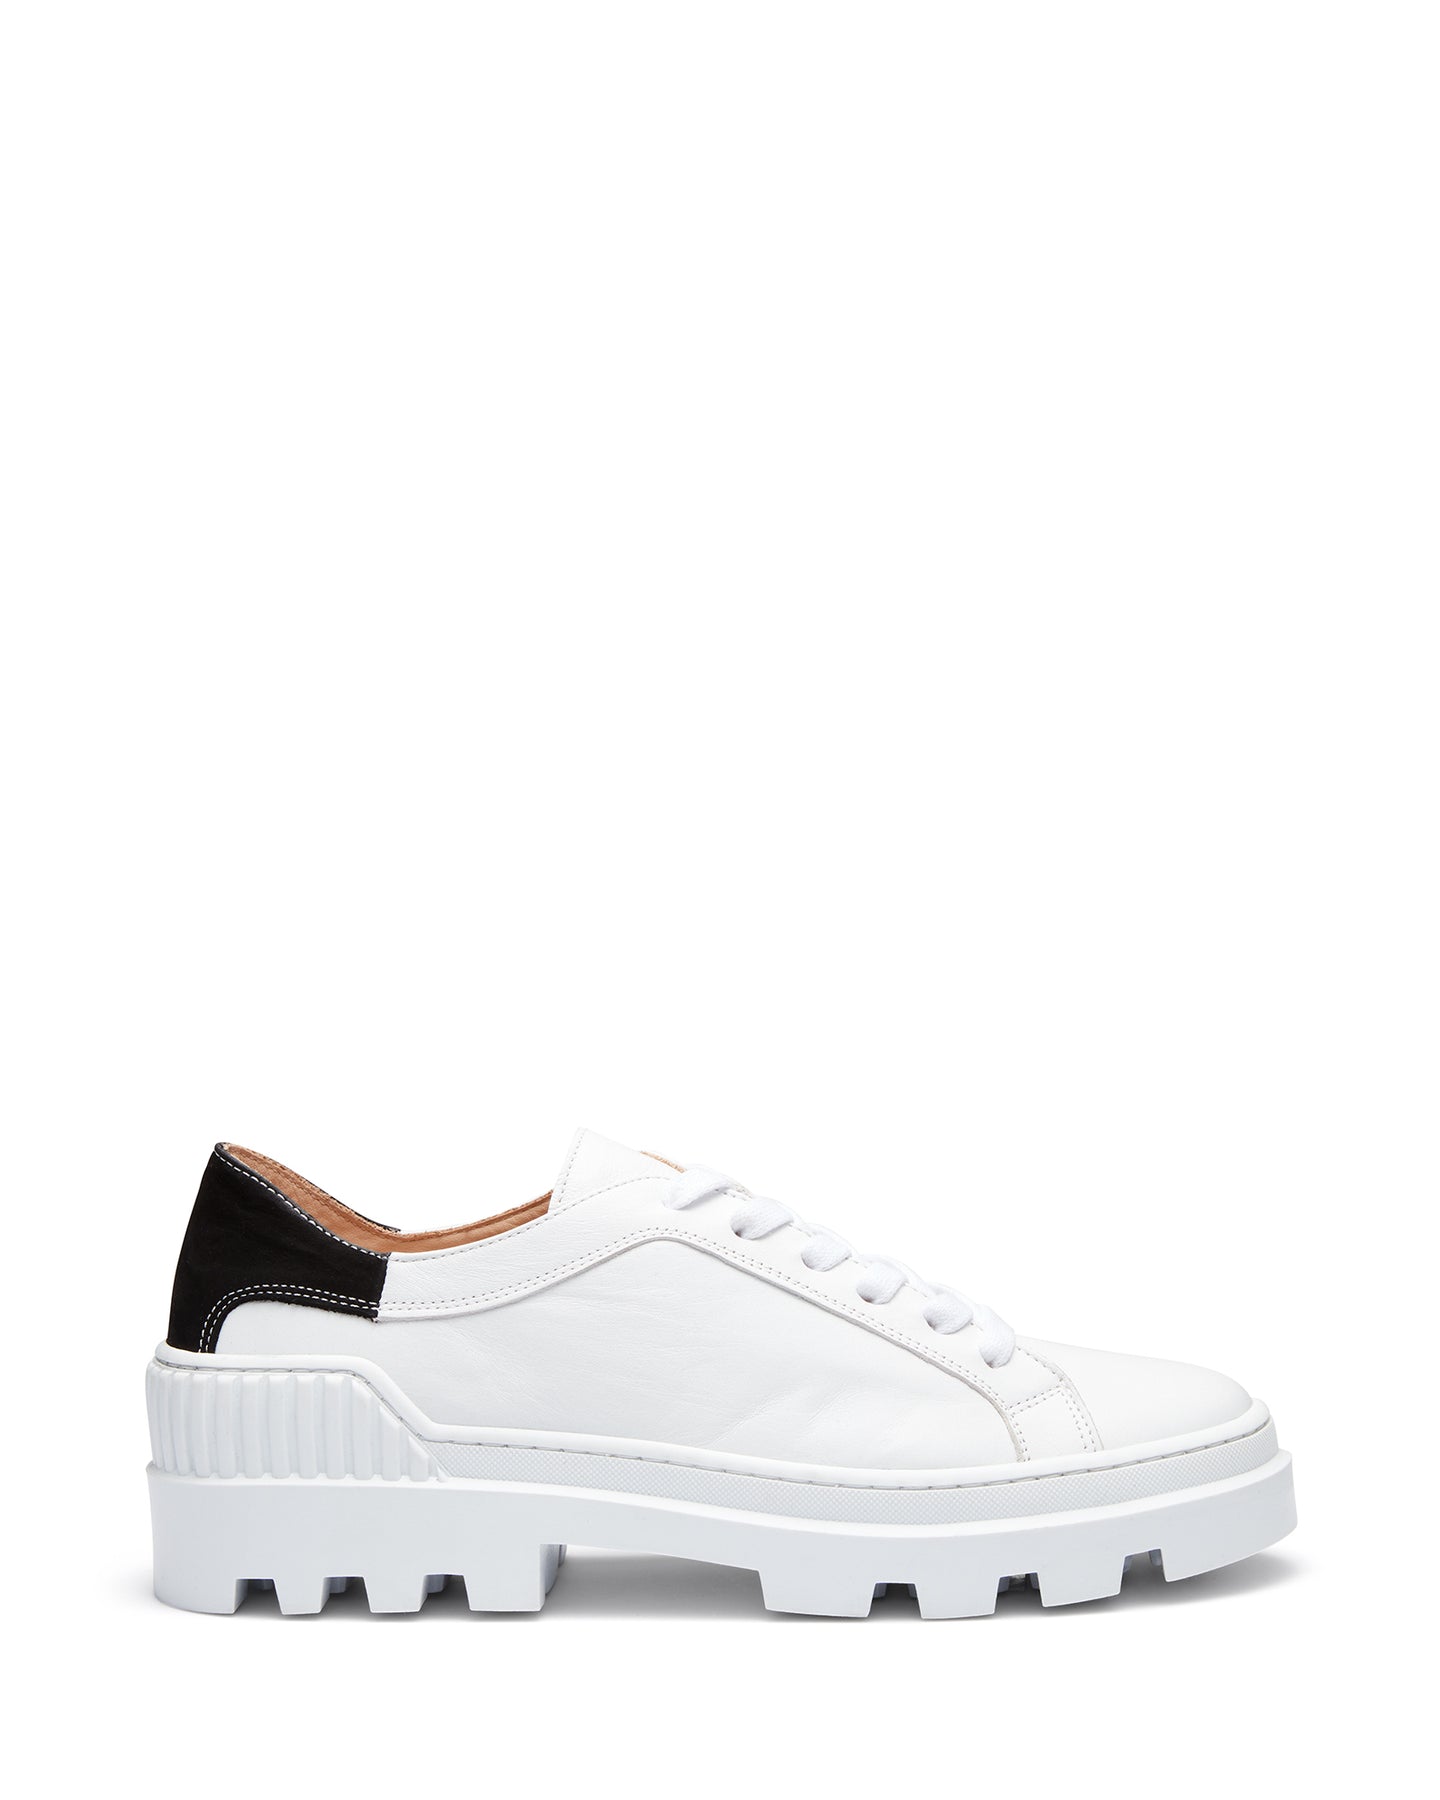 Just Because Shoes Patch White | Leather Sneaker | Lace Up | Platform